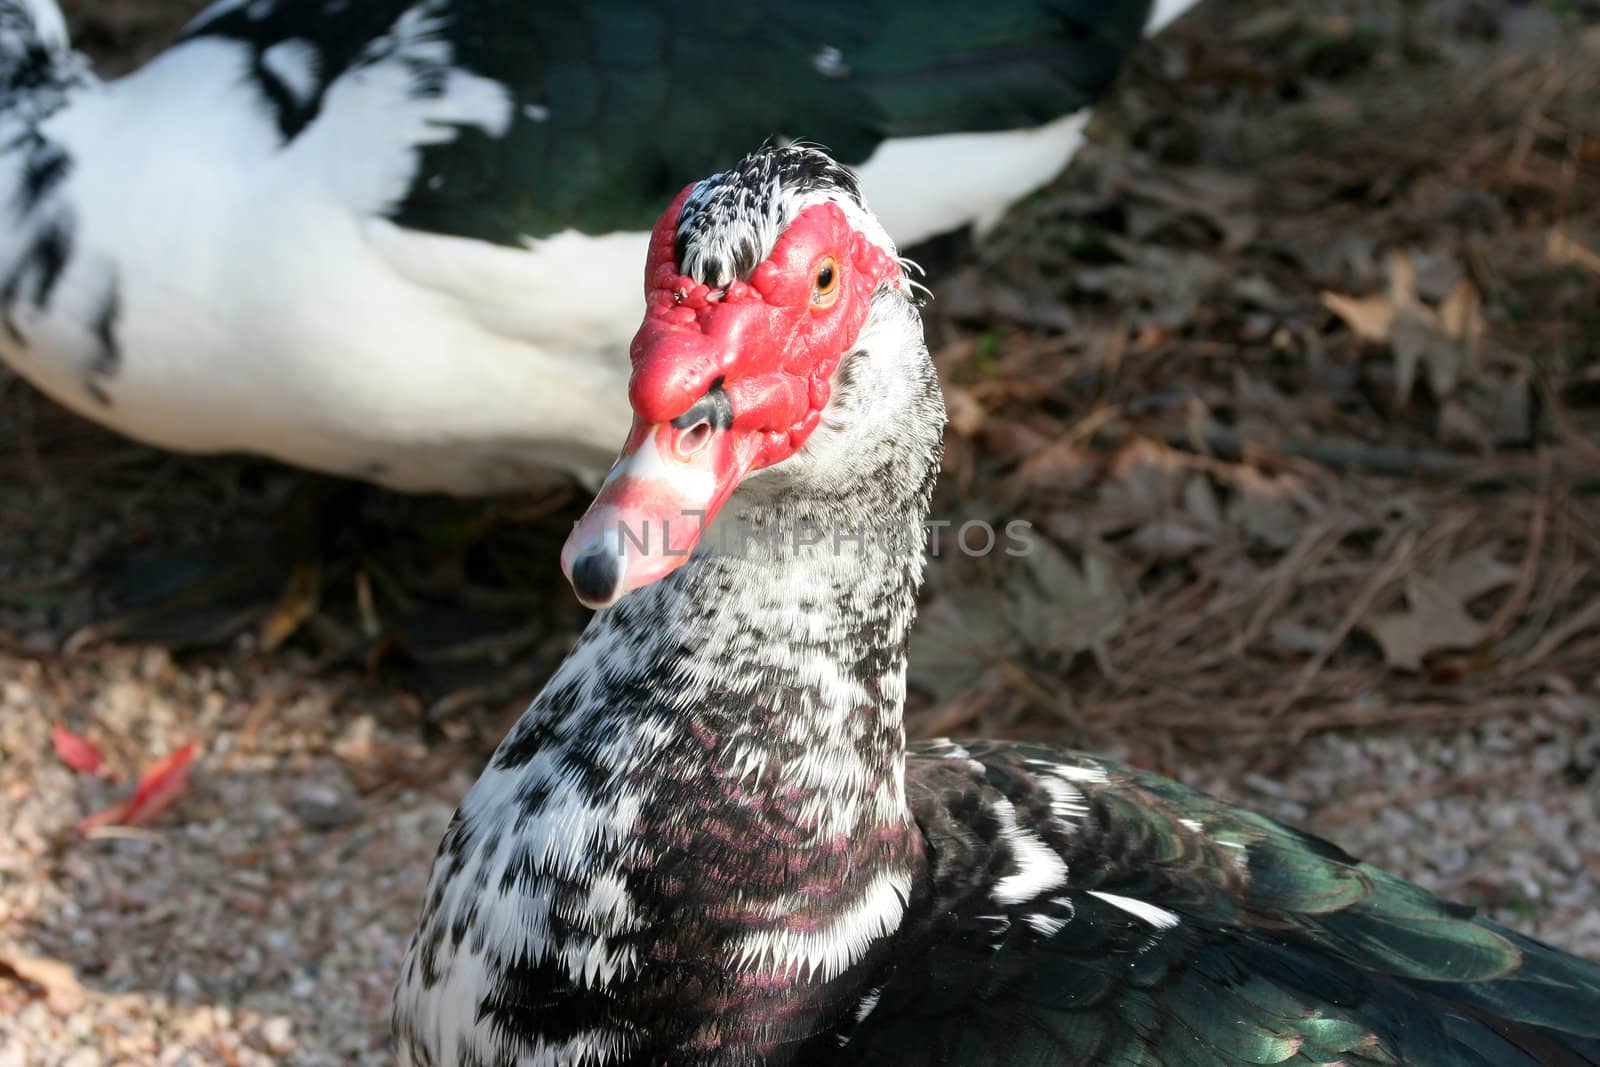 A close up shot of a ducks head looking into the camera